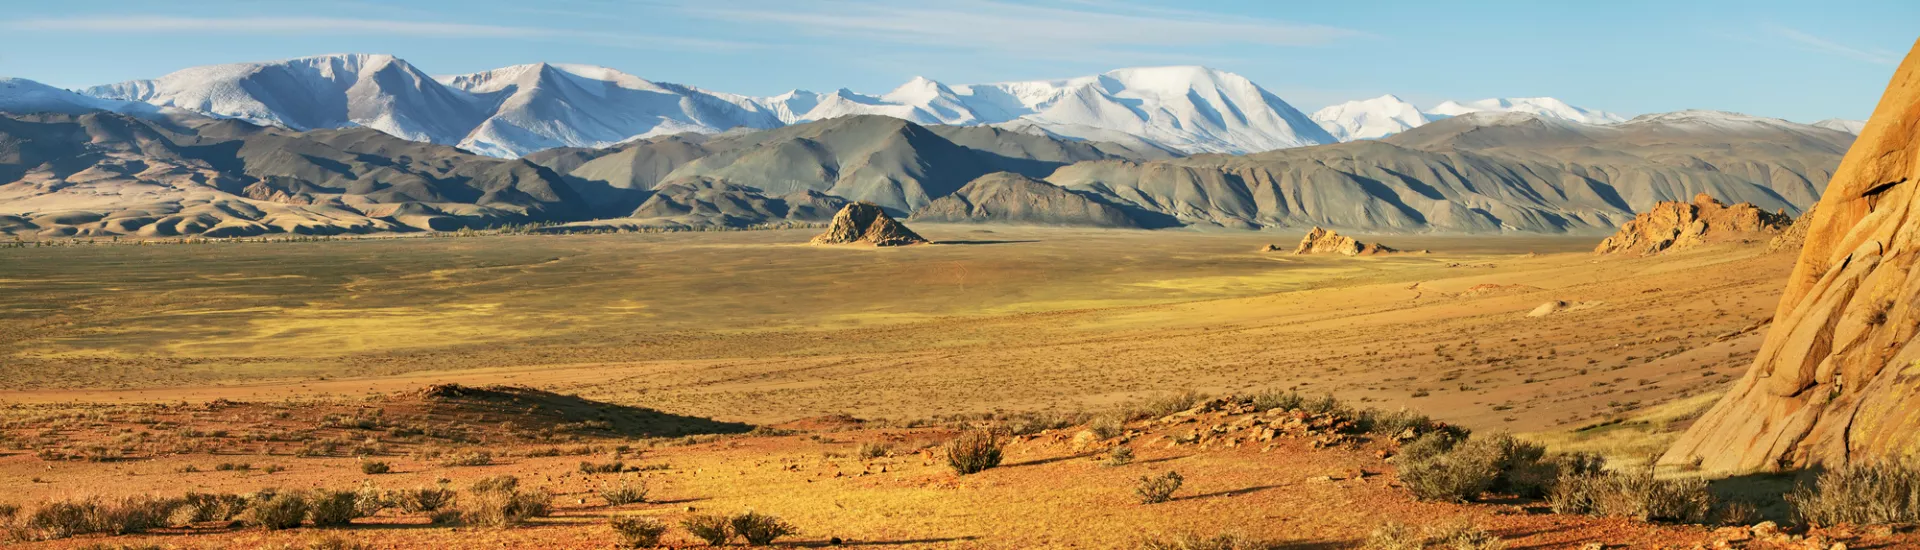 Typical landscapes of Mongolia